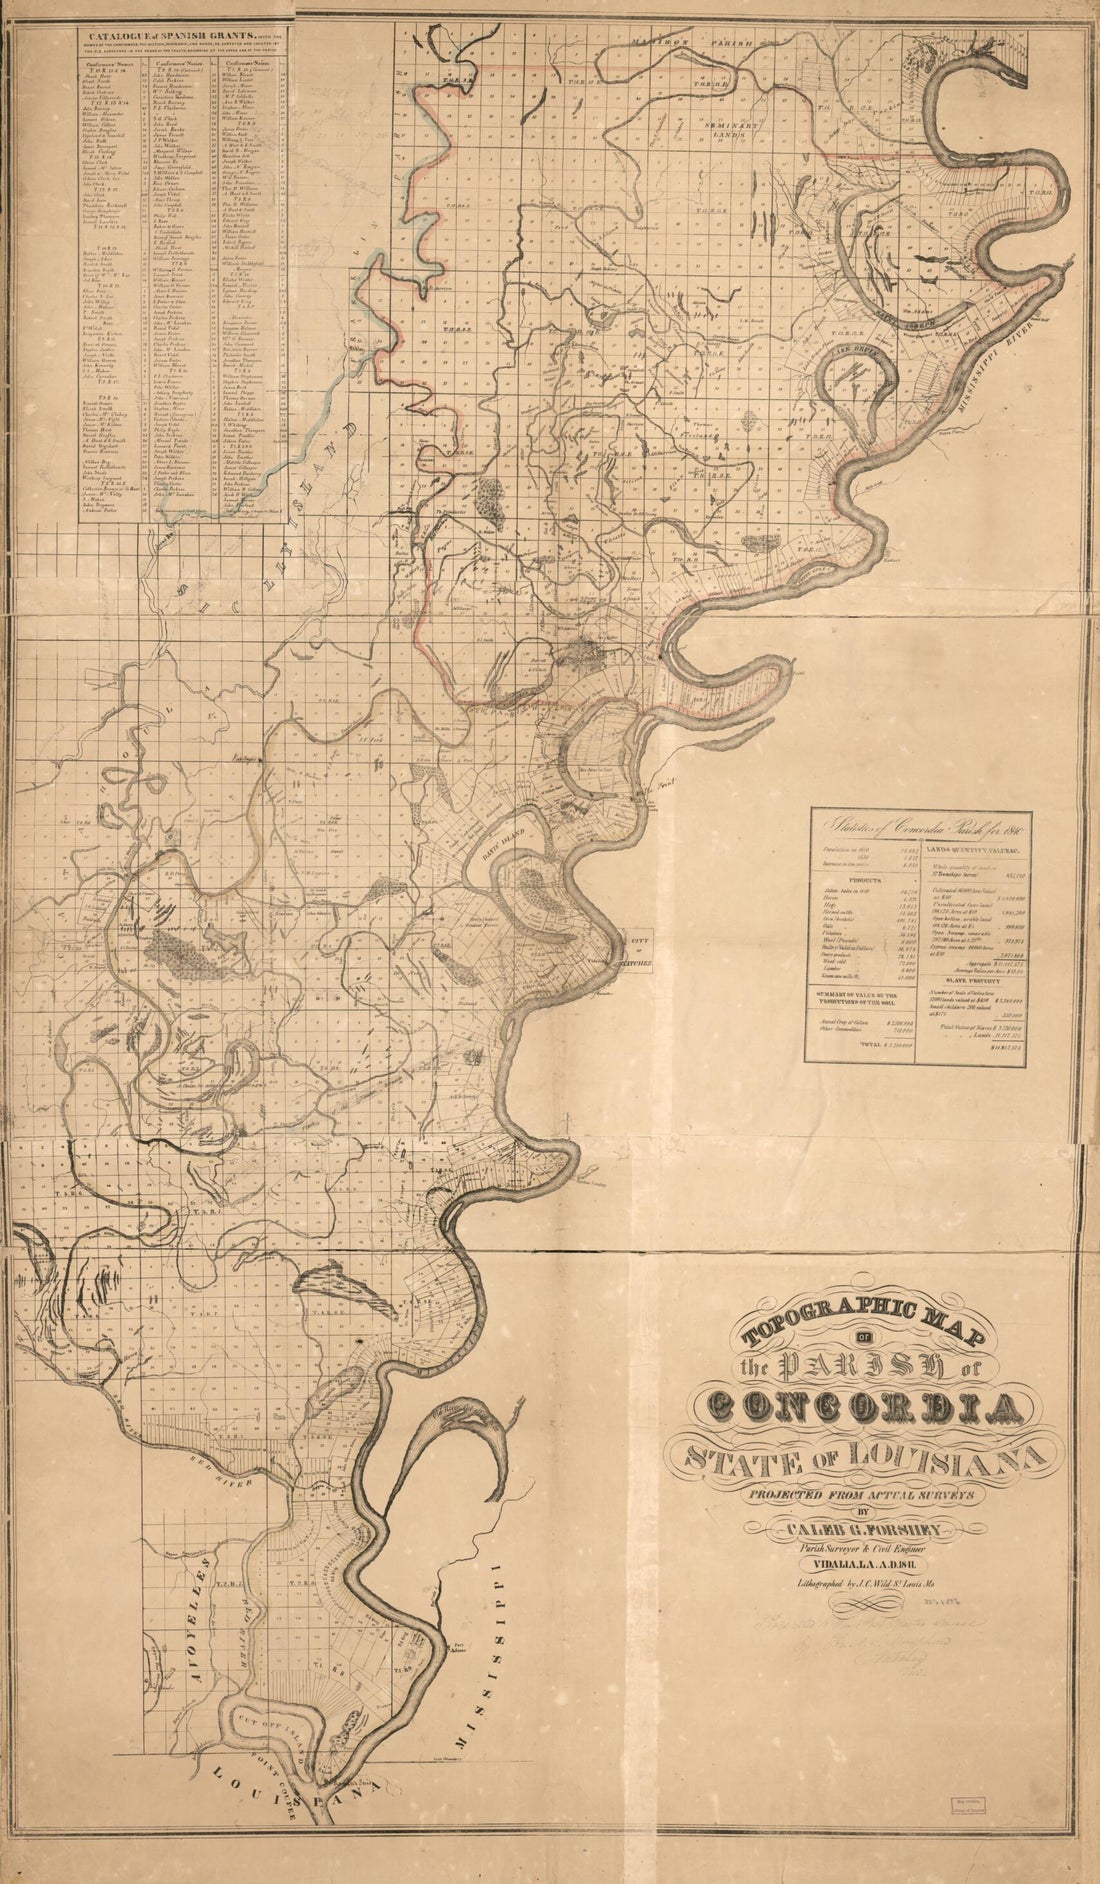 This old map of Topographic Map of the Parish of Concordia, State of Louisiana from 1841 was created by Caleb Goldsmith Forshey in 1841